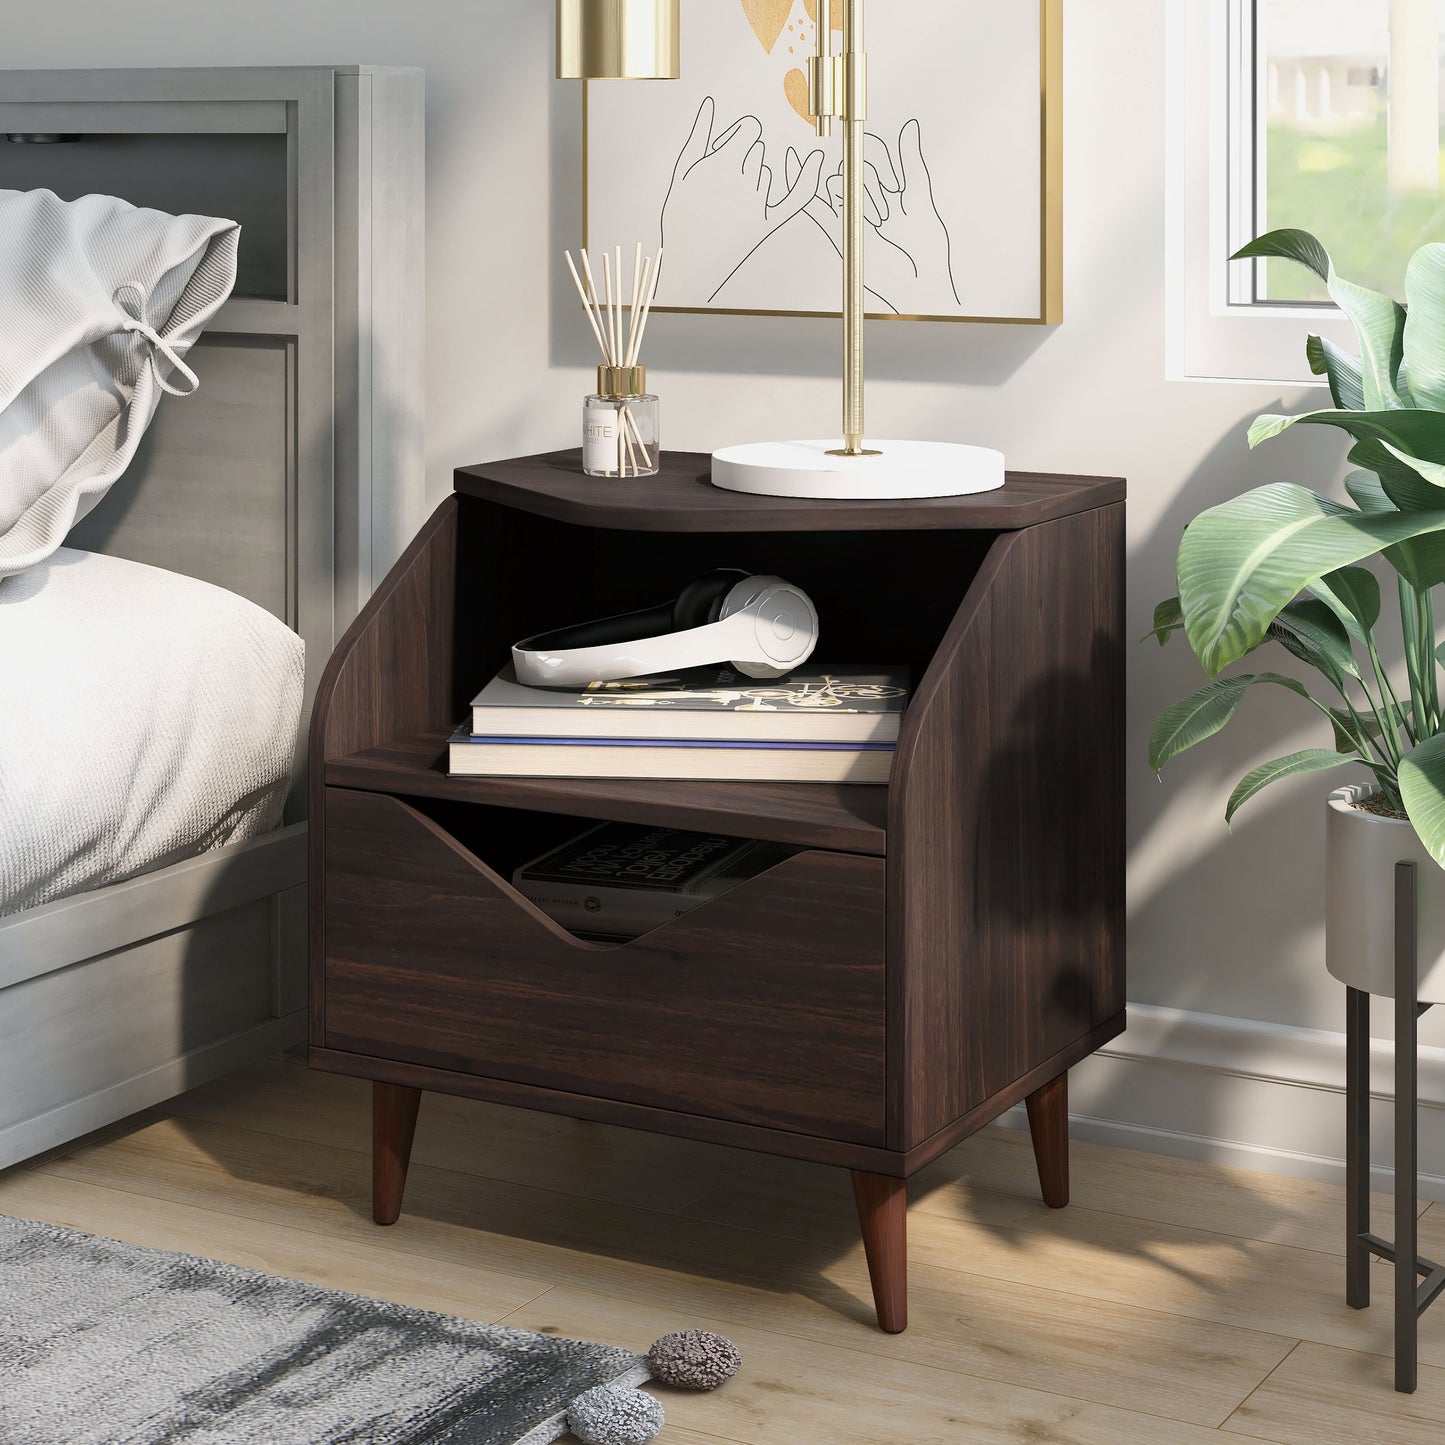 Left angled mid-century modern wenge one-drawer end table in a bedroom with accessories